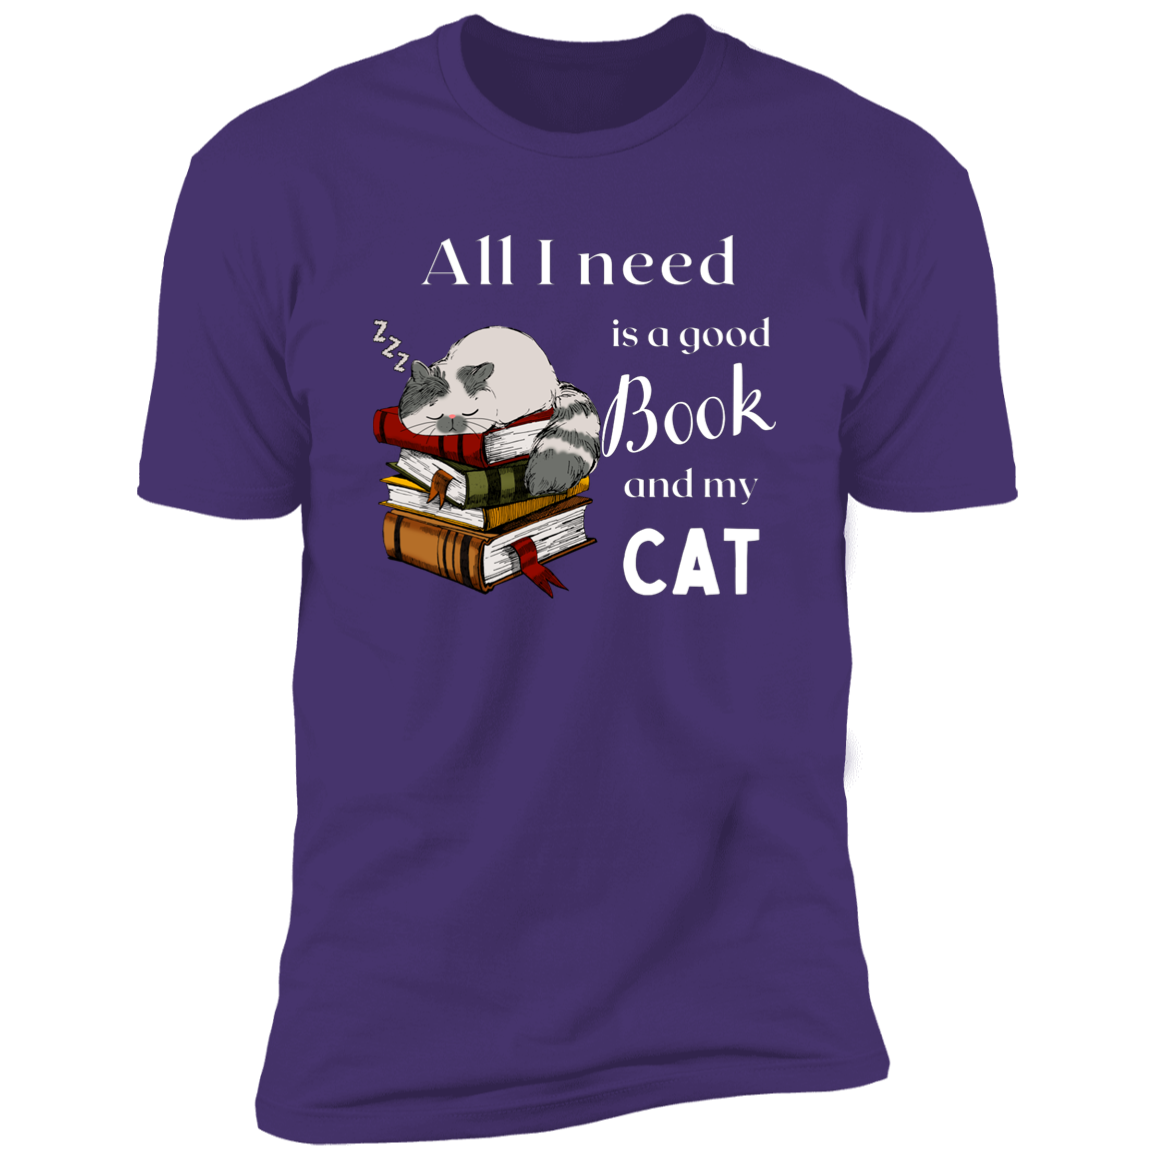 All I Need is a Good Book and My Cat t-shirt for humans, in purple rush